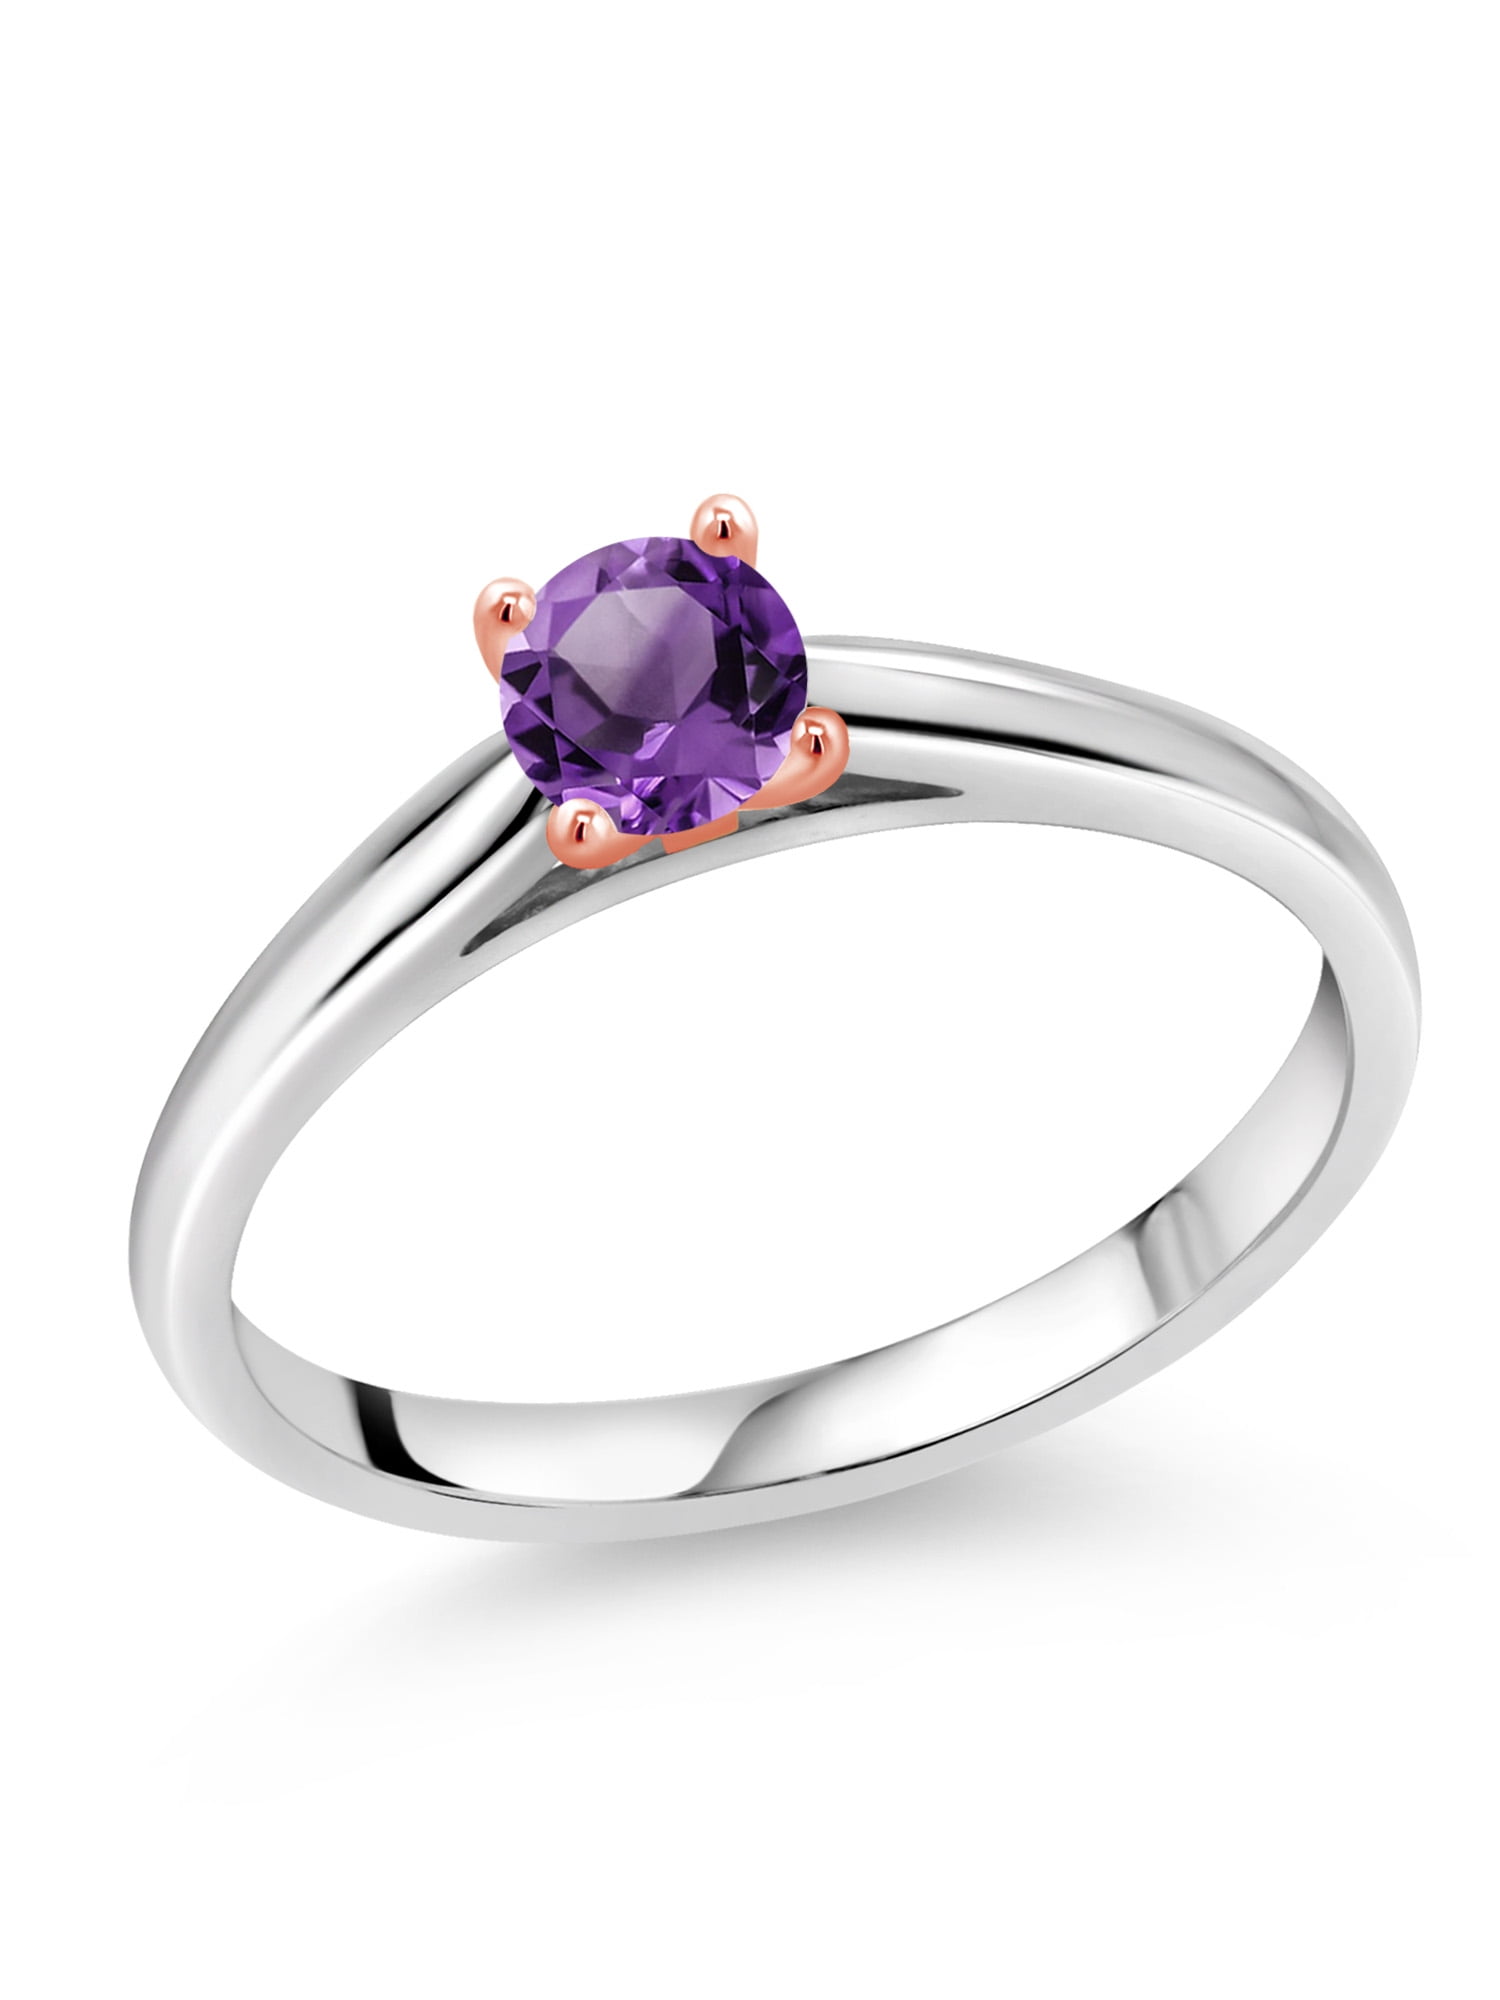 Gem Stone King 925 Sterling Silver 0.48 Ct Round Purple Amethyst 3-Stone Ring